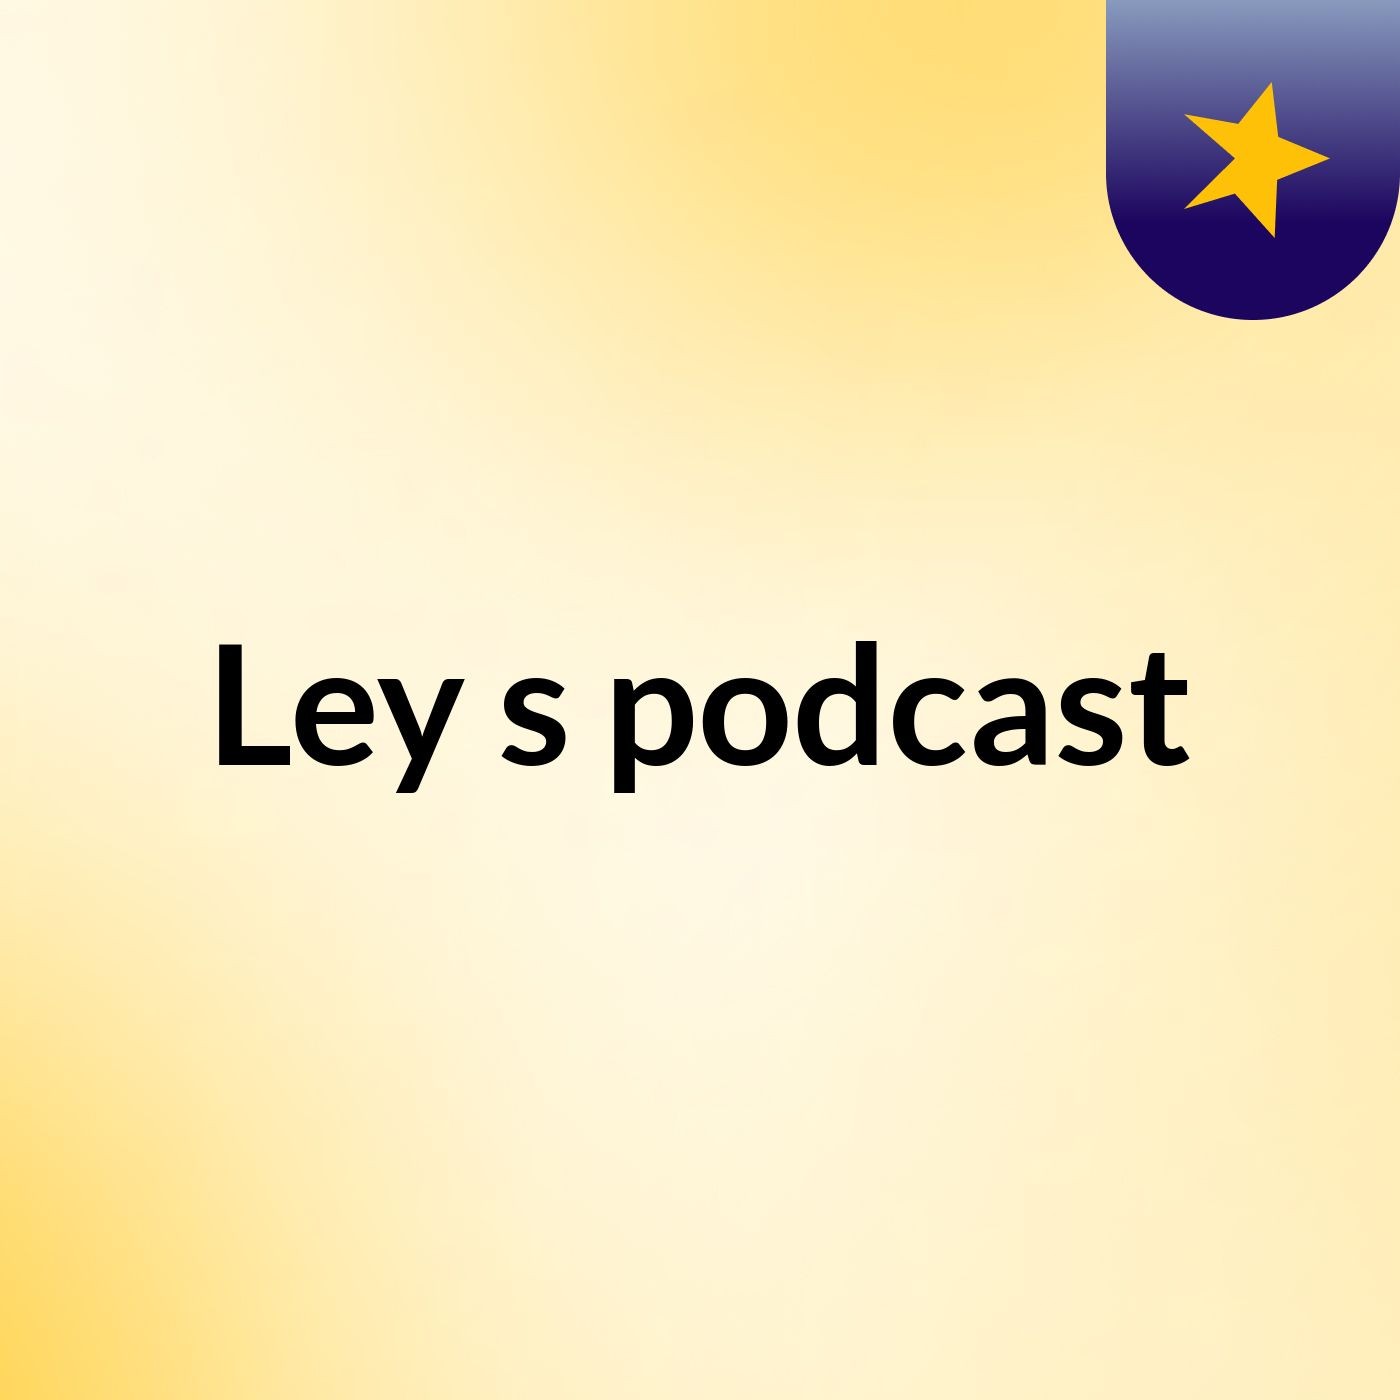 Ley's podcast